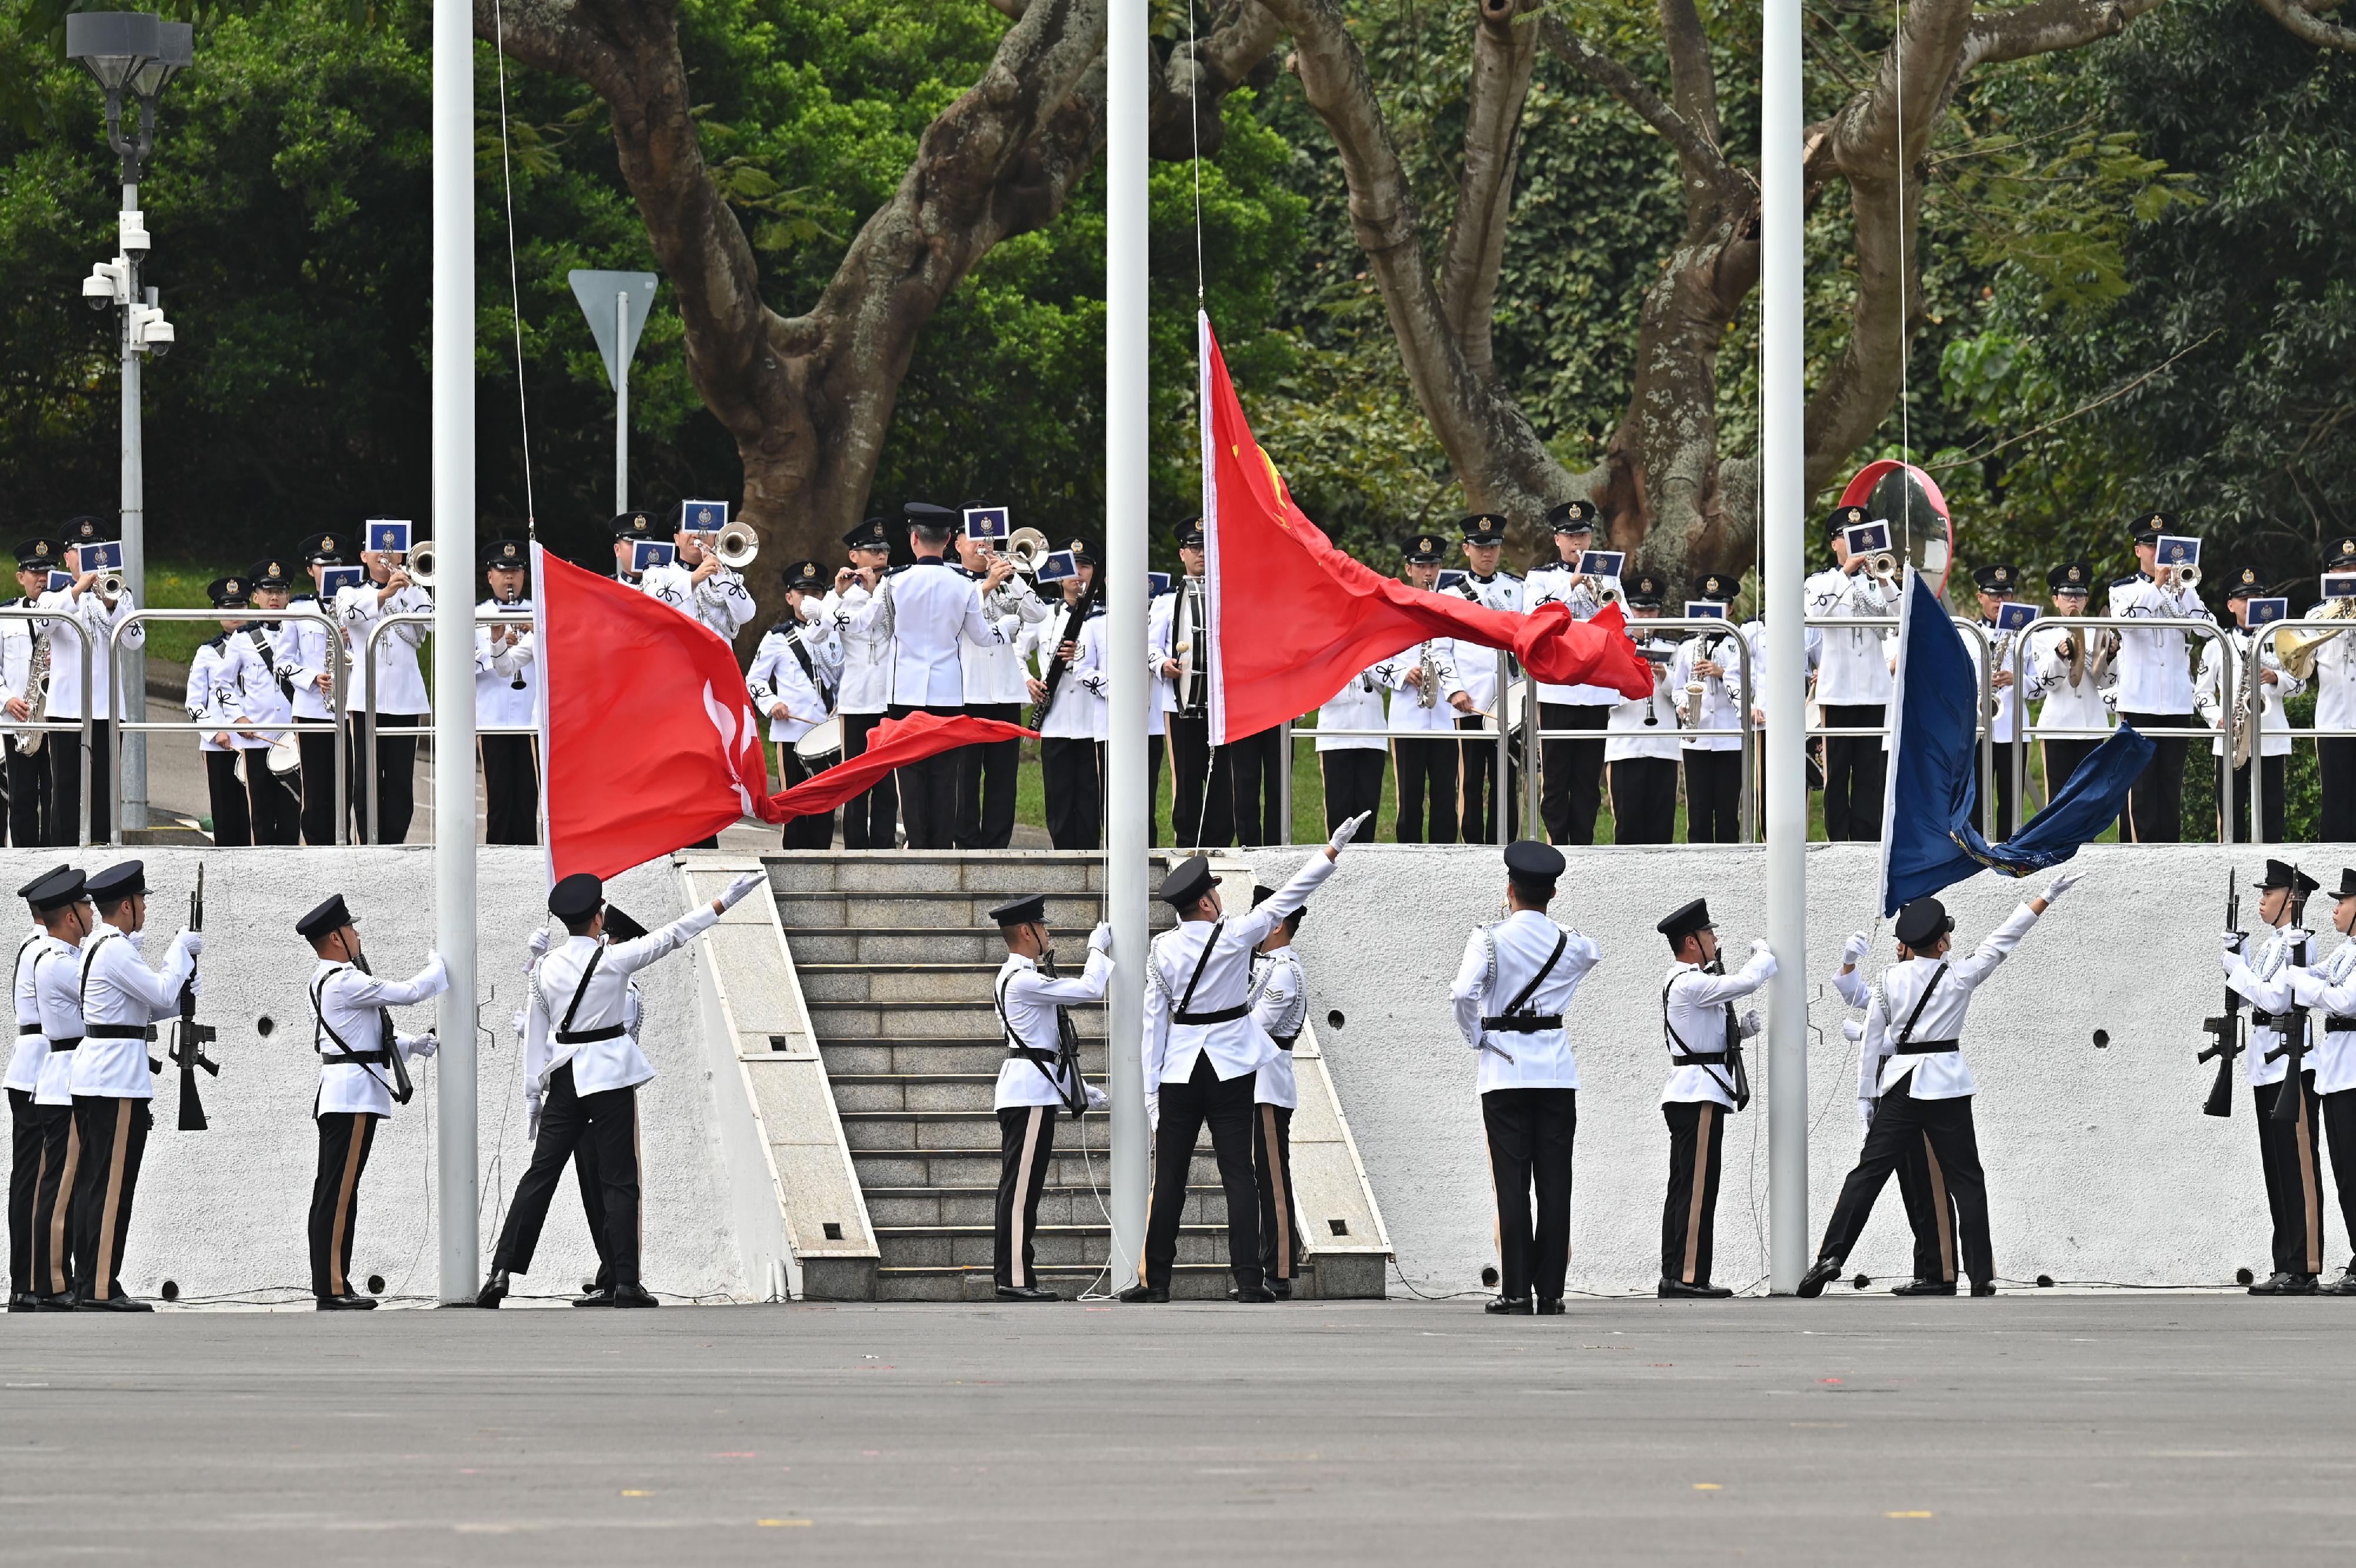 The Police Force held an open day in support of the National Security Education Day at Hong Kong Police College today (April 15). Photo shows the hoisting of the National Flag.
